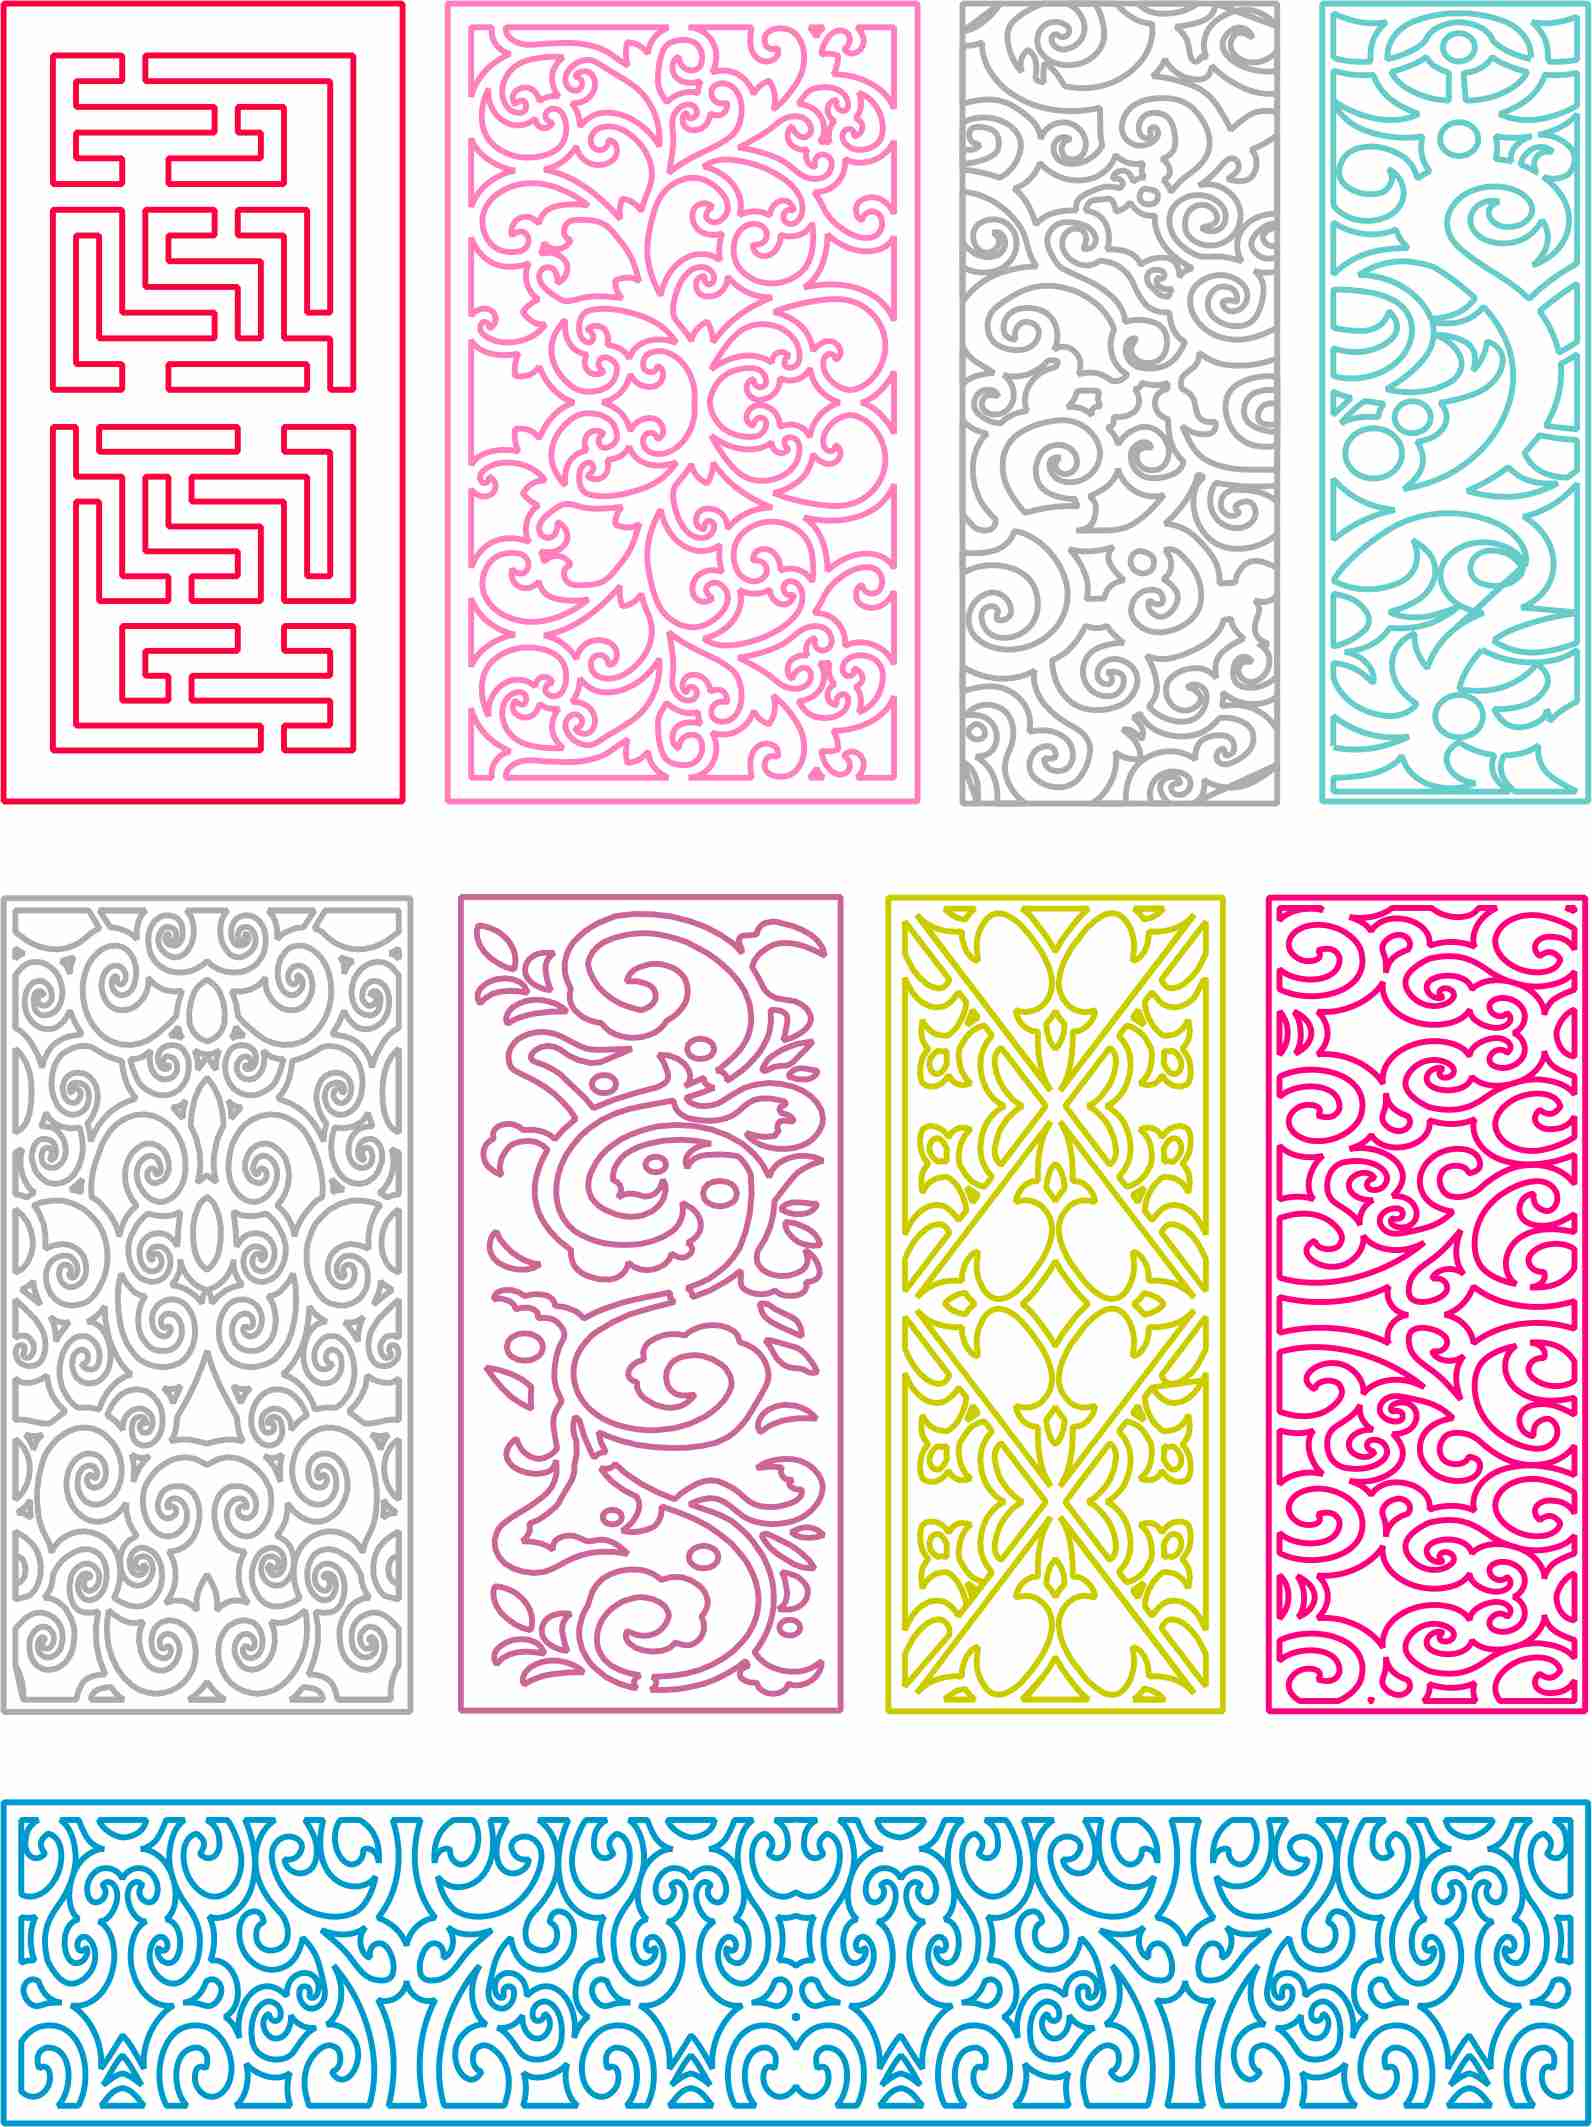 9 patterns dxf for cnc free download - Designs CNC Free Vectors For All